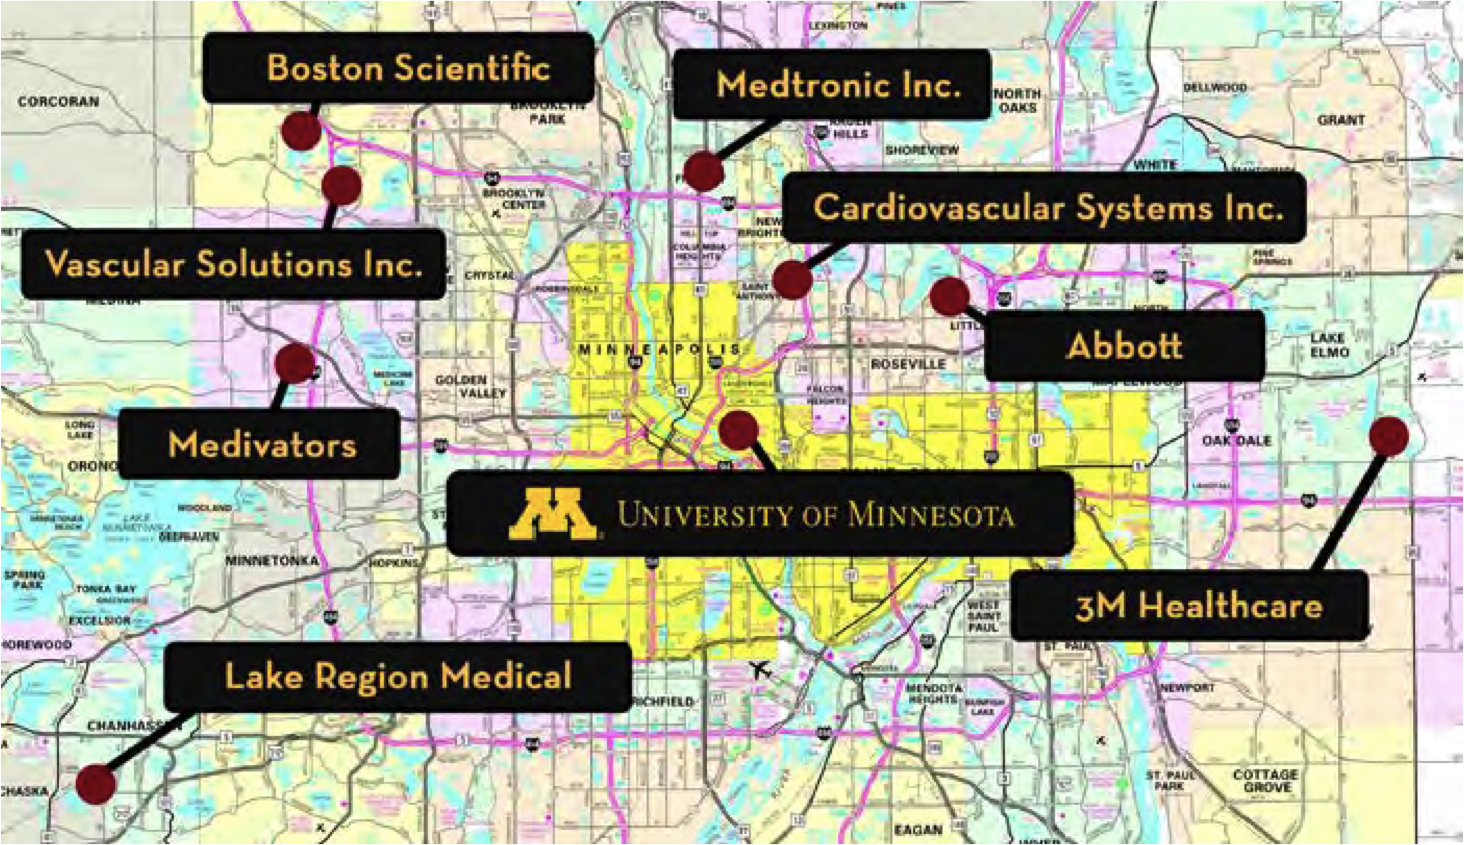 Map of Twin Cities showing University of Minnesota in the center of a cluster of cardiovascular device companies (Medtronic, Vascular Solutions, Boston Scientific, Abbott, Lake Region Medical, Medivators, 3M Healthcare)